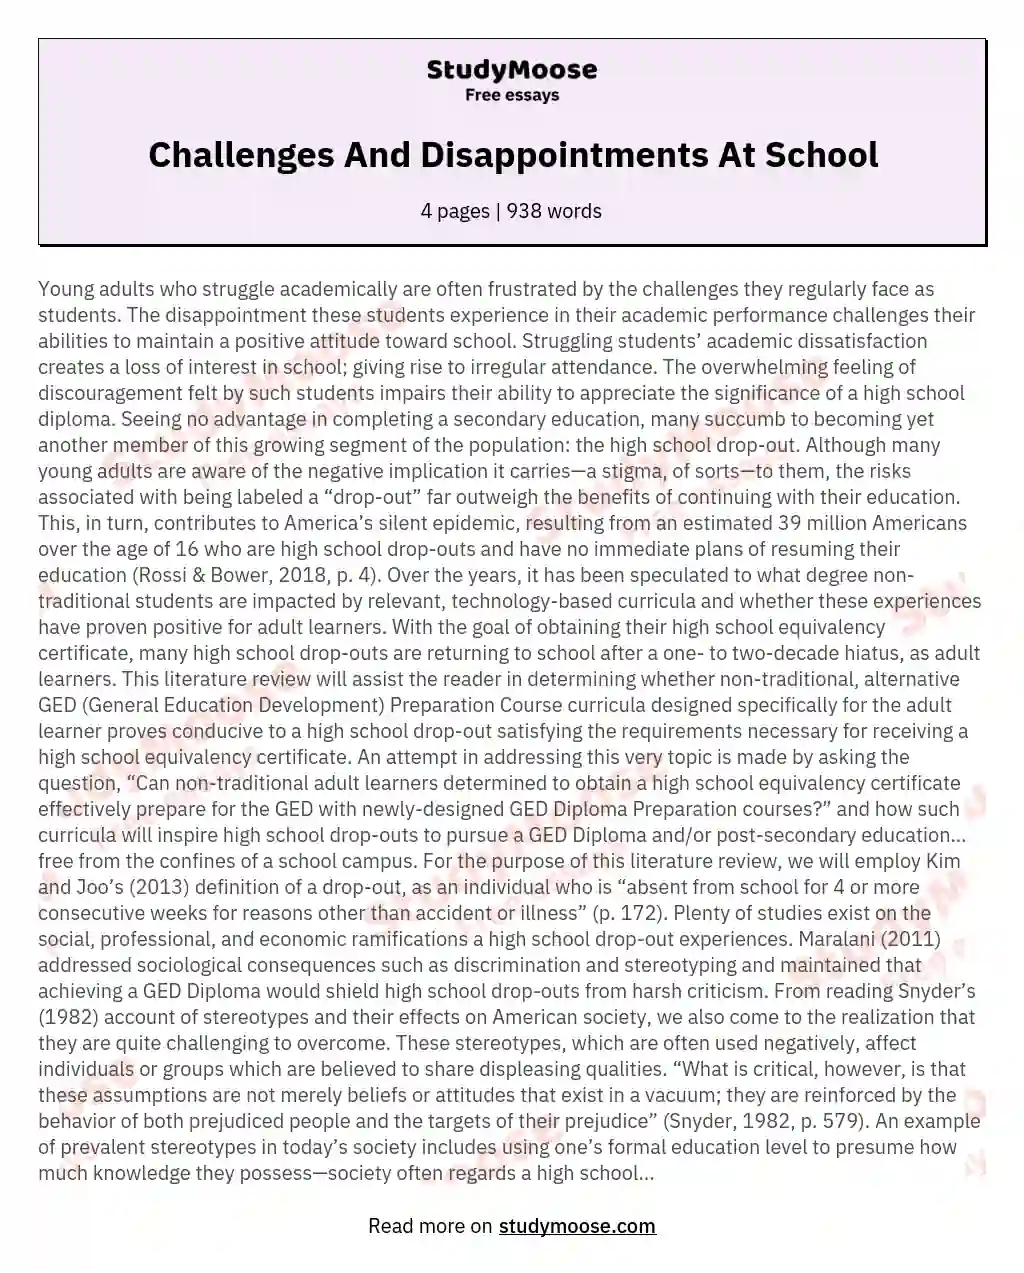 Challenges And Disappointments At School essay